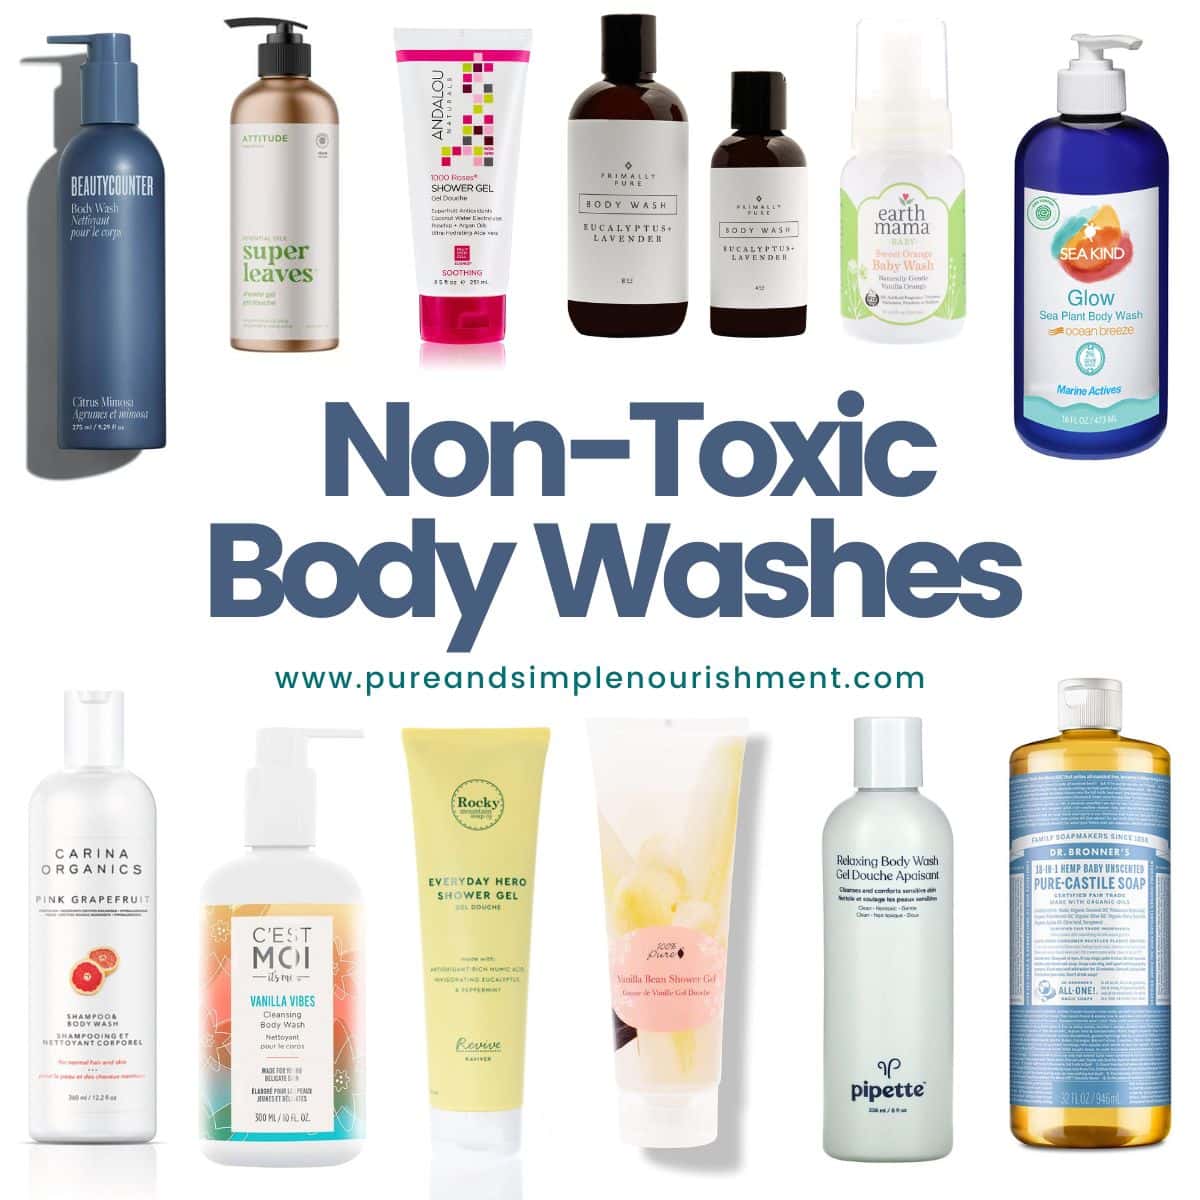 A collage of body washes with the title "Non-Toxic Body Washes" over them.